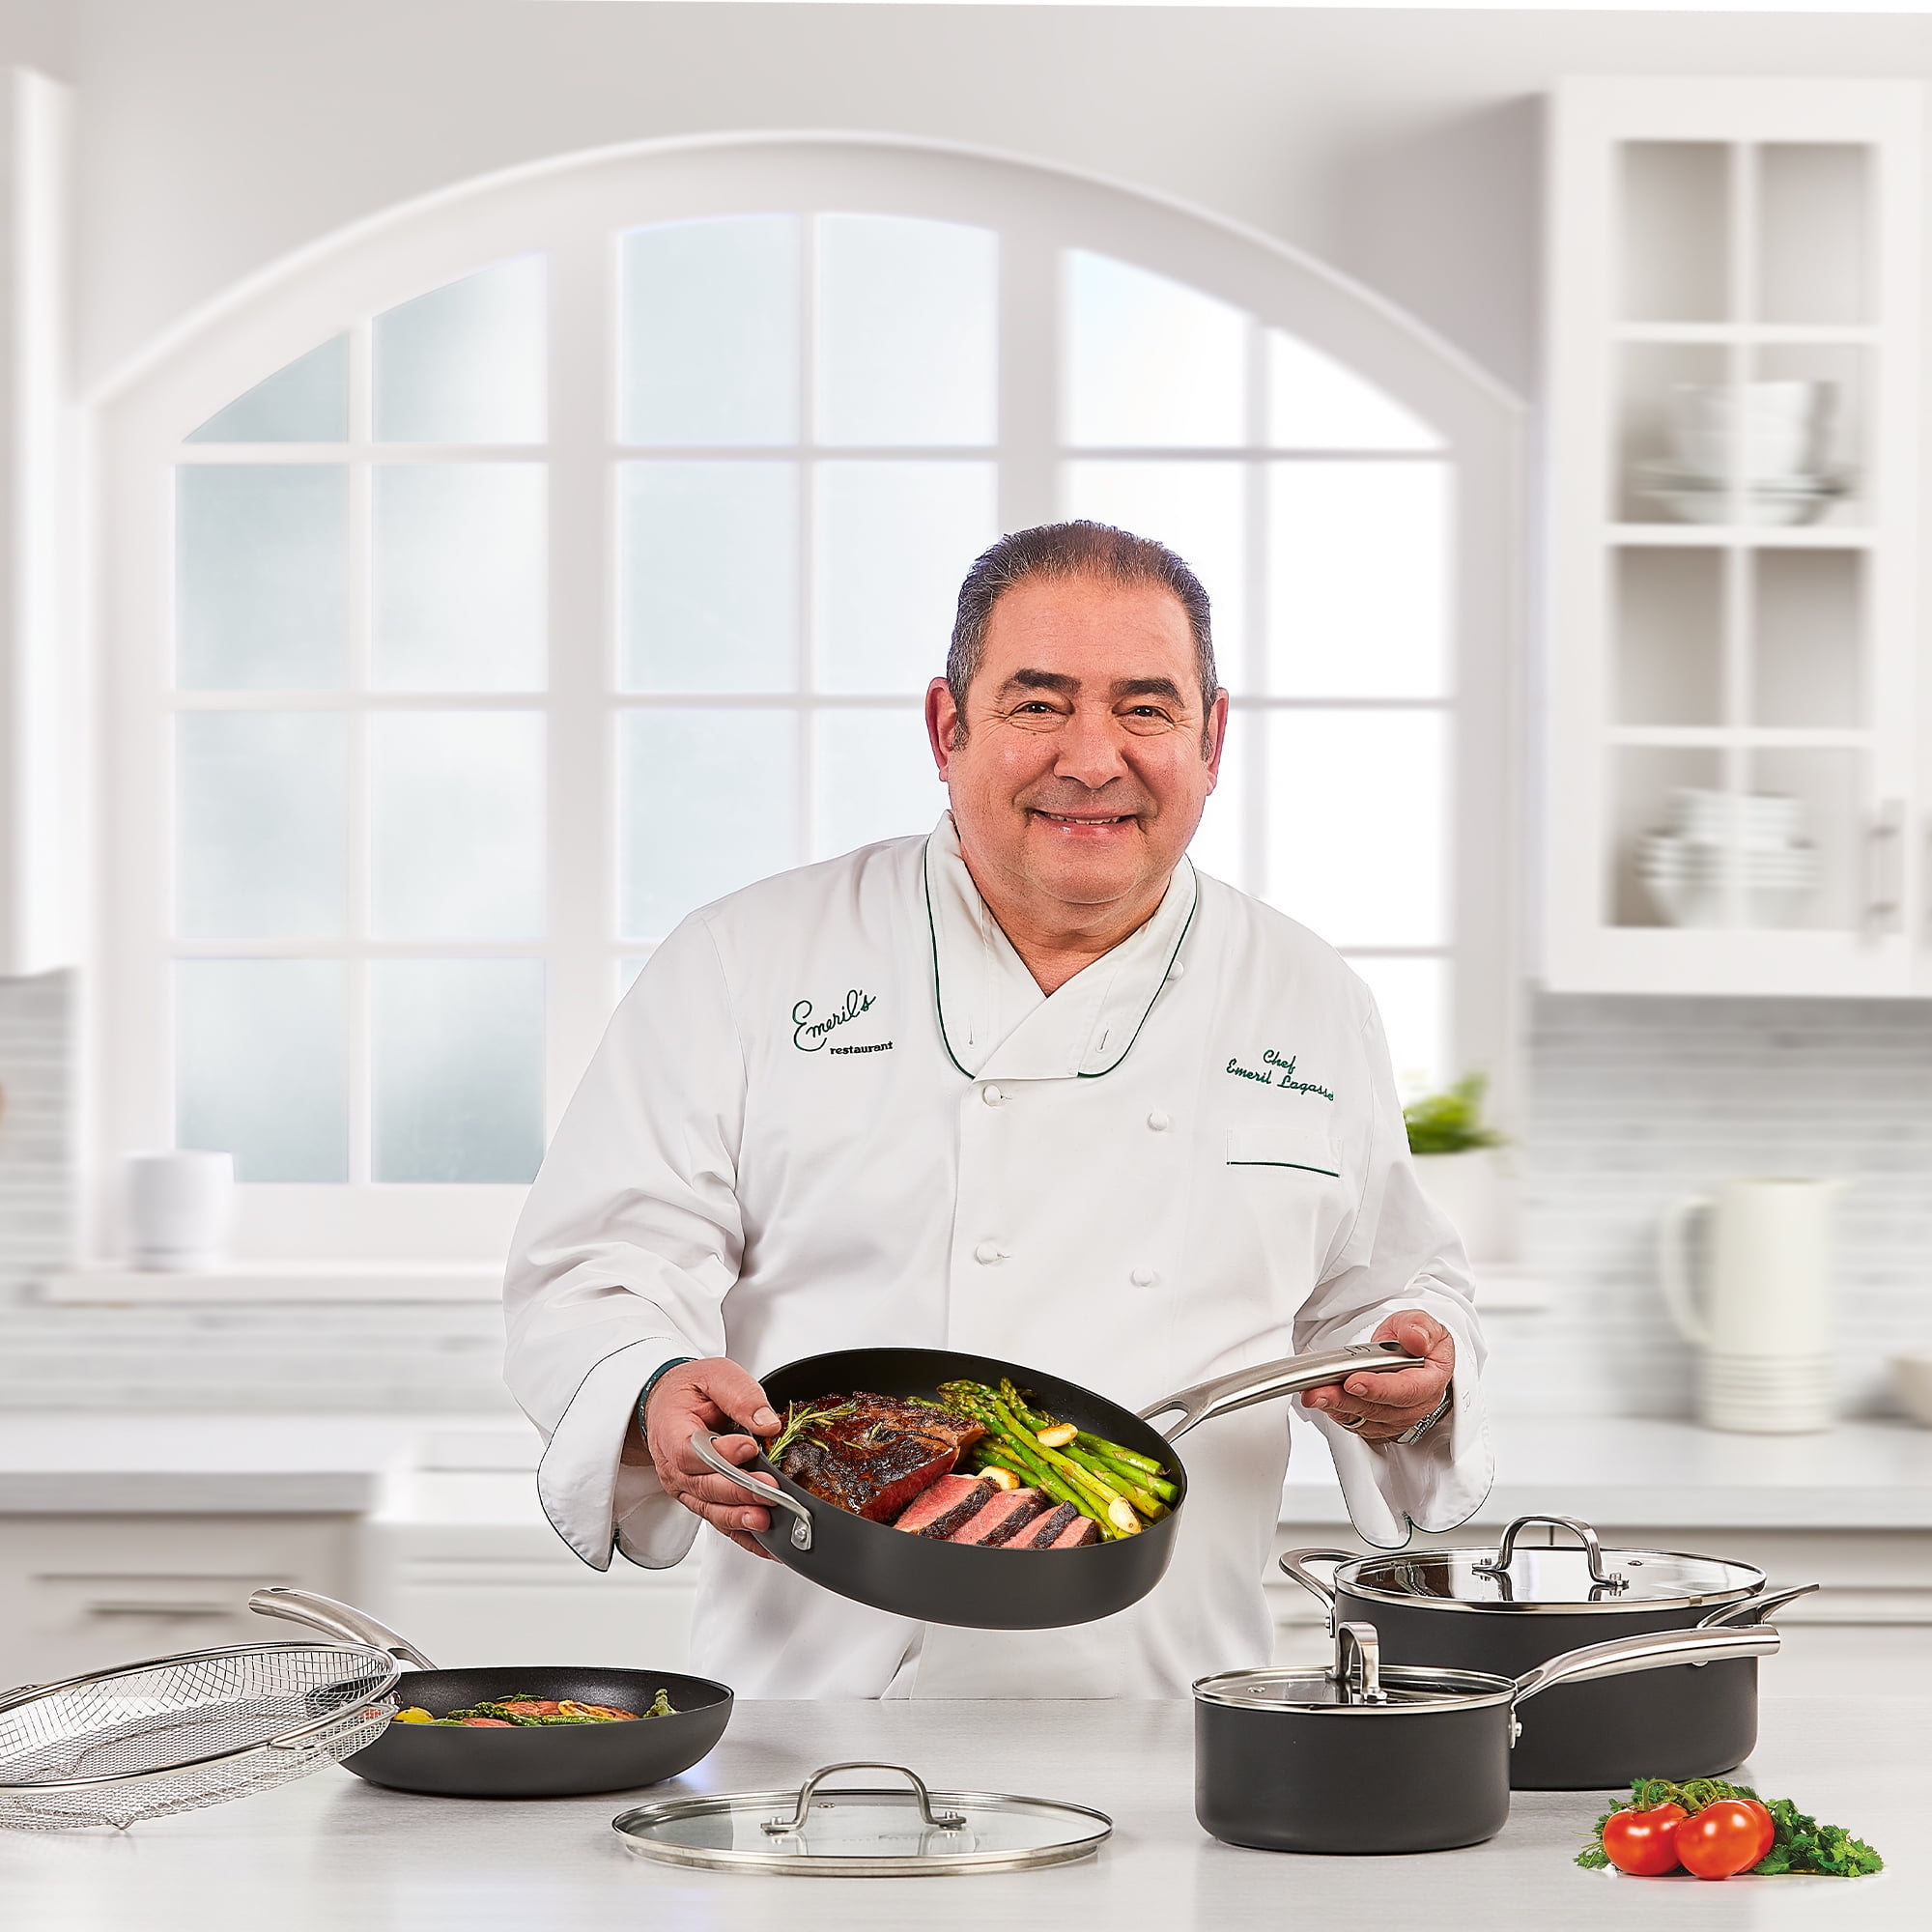 Emeril Lagasse's 5-Star Rated Cookware Set Is on Sale Today at Walmart & It  Makes a Great Holiday Gift